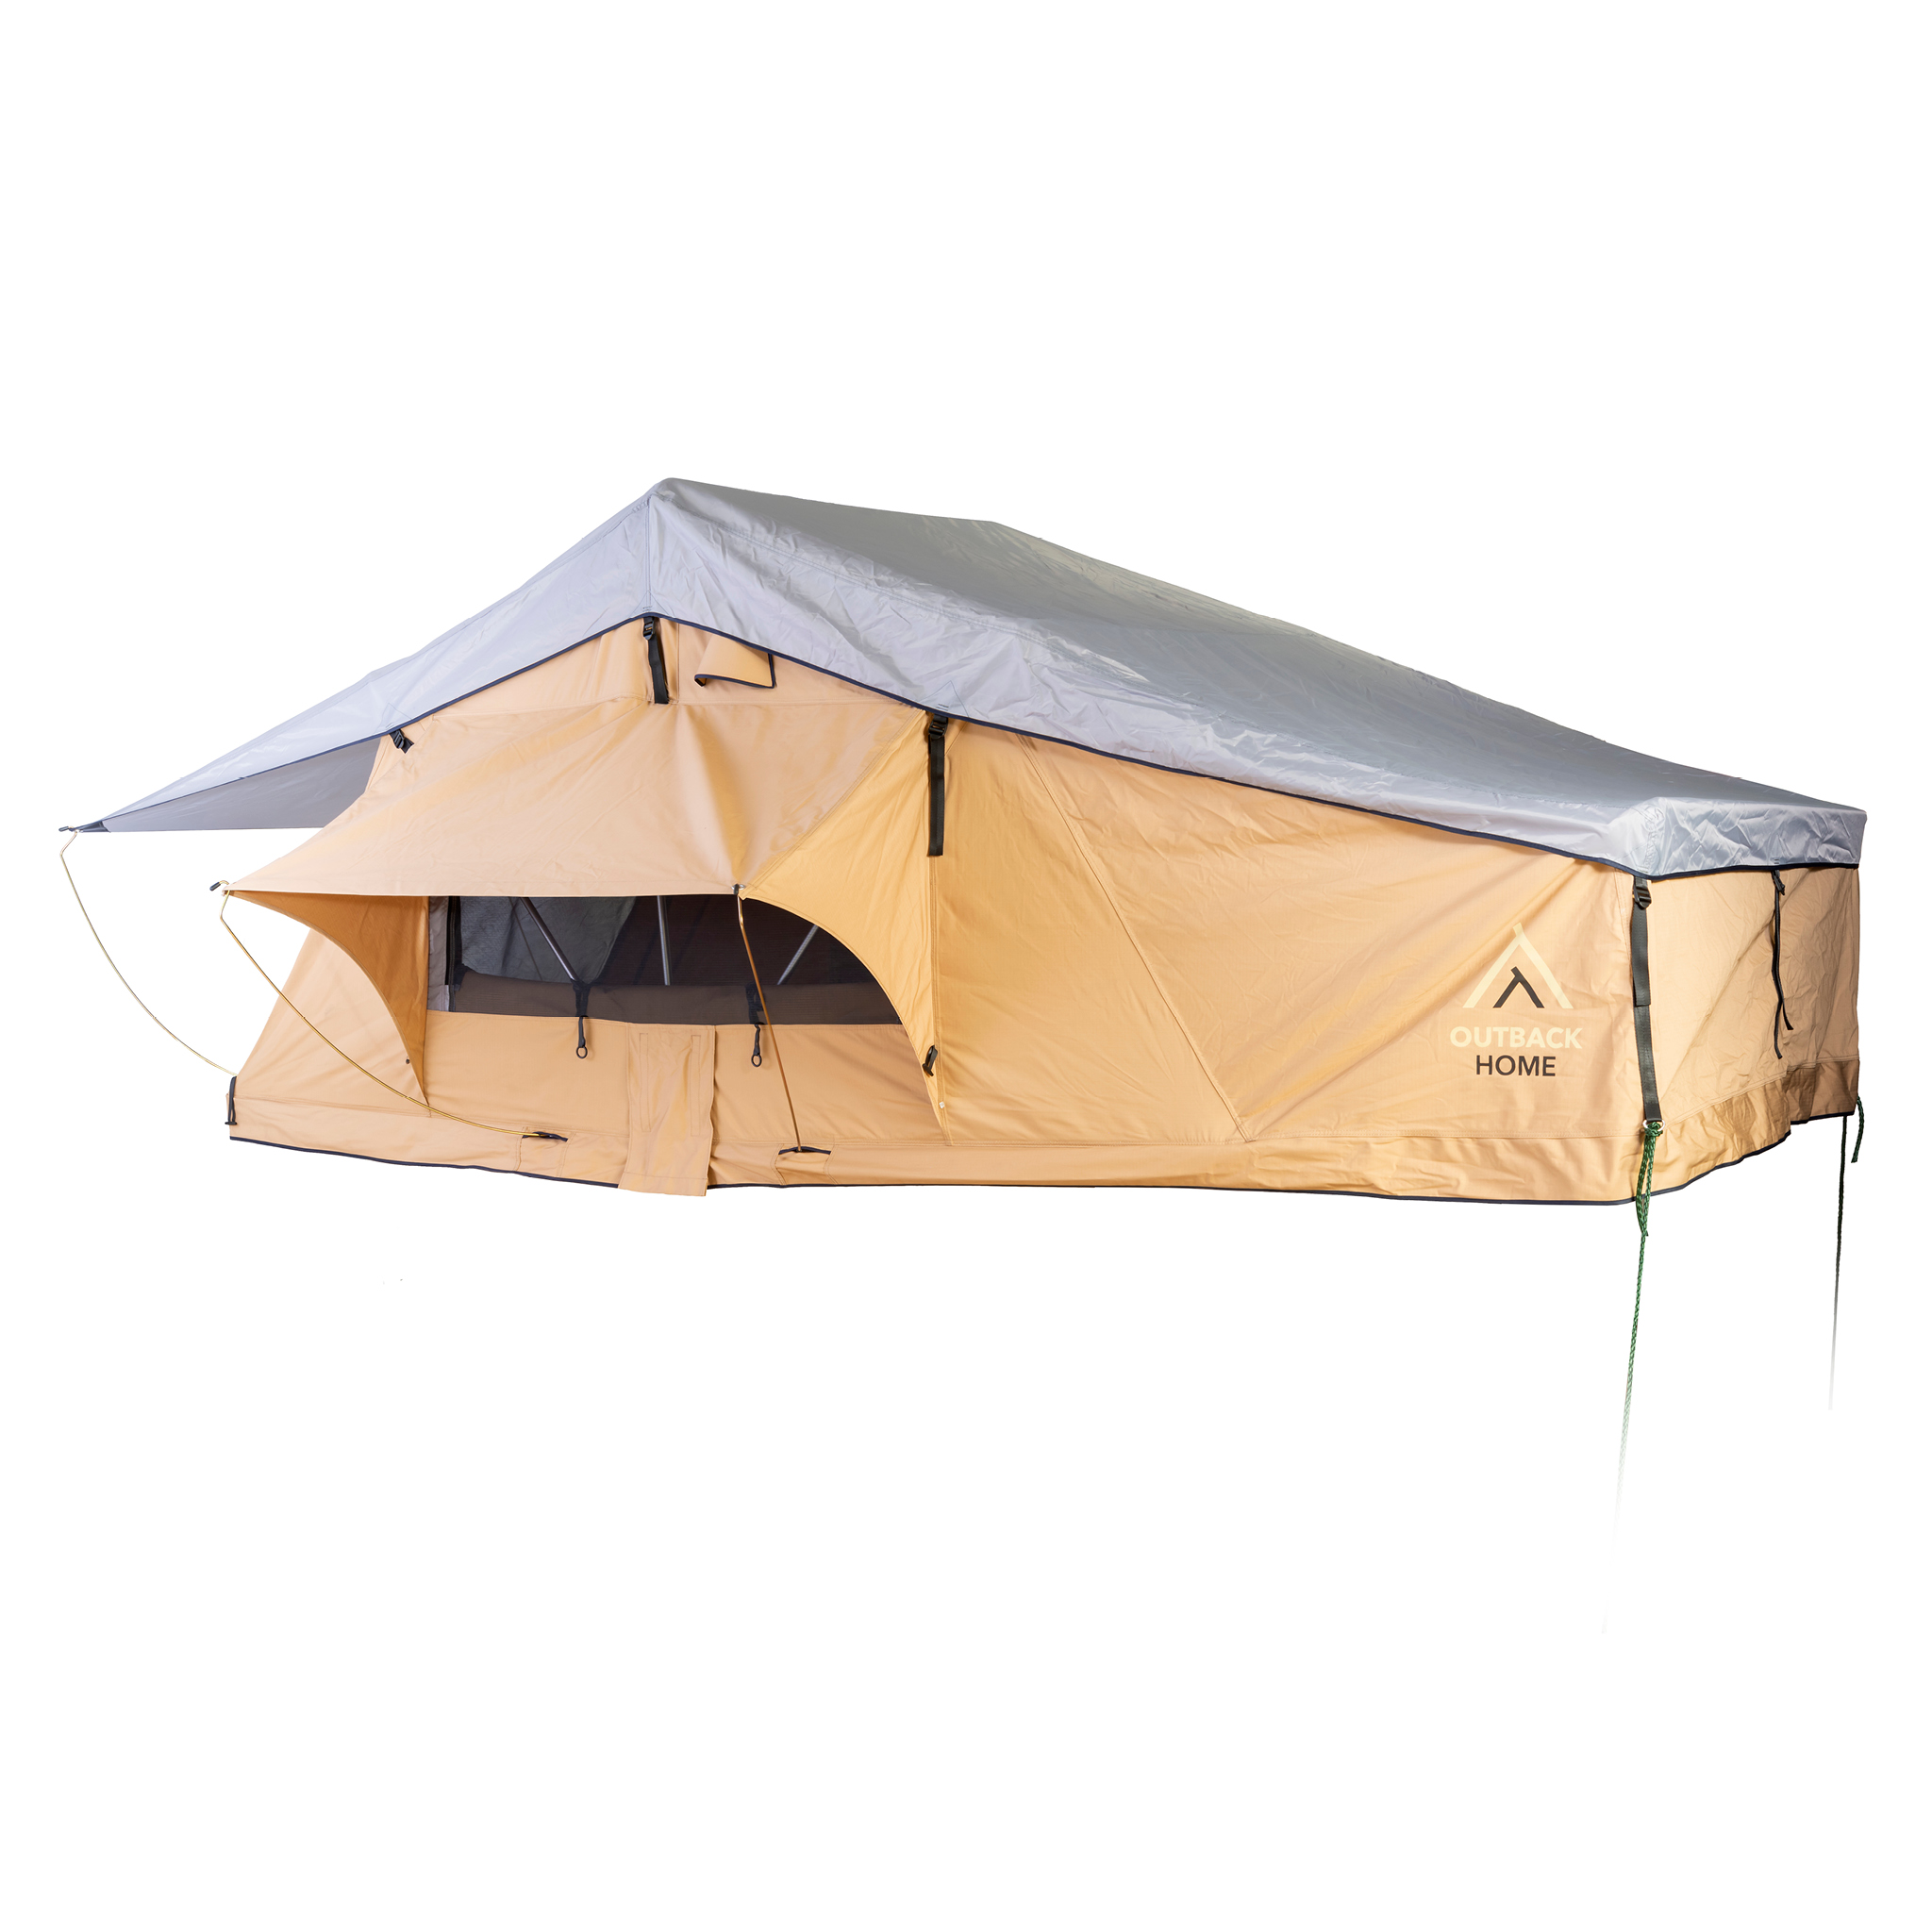 Softshell Rooftop Tent